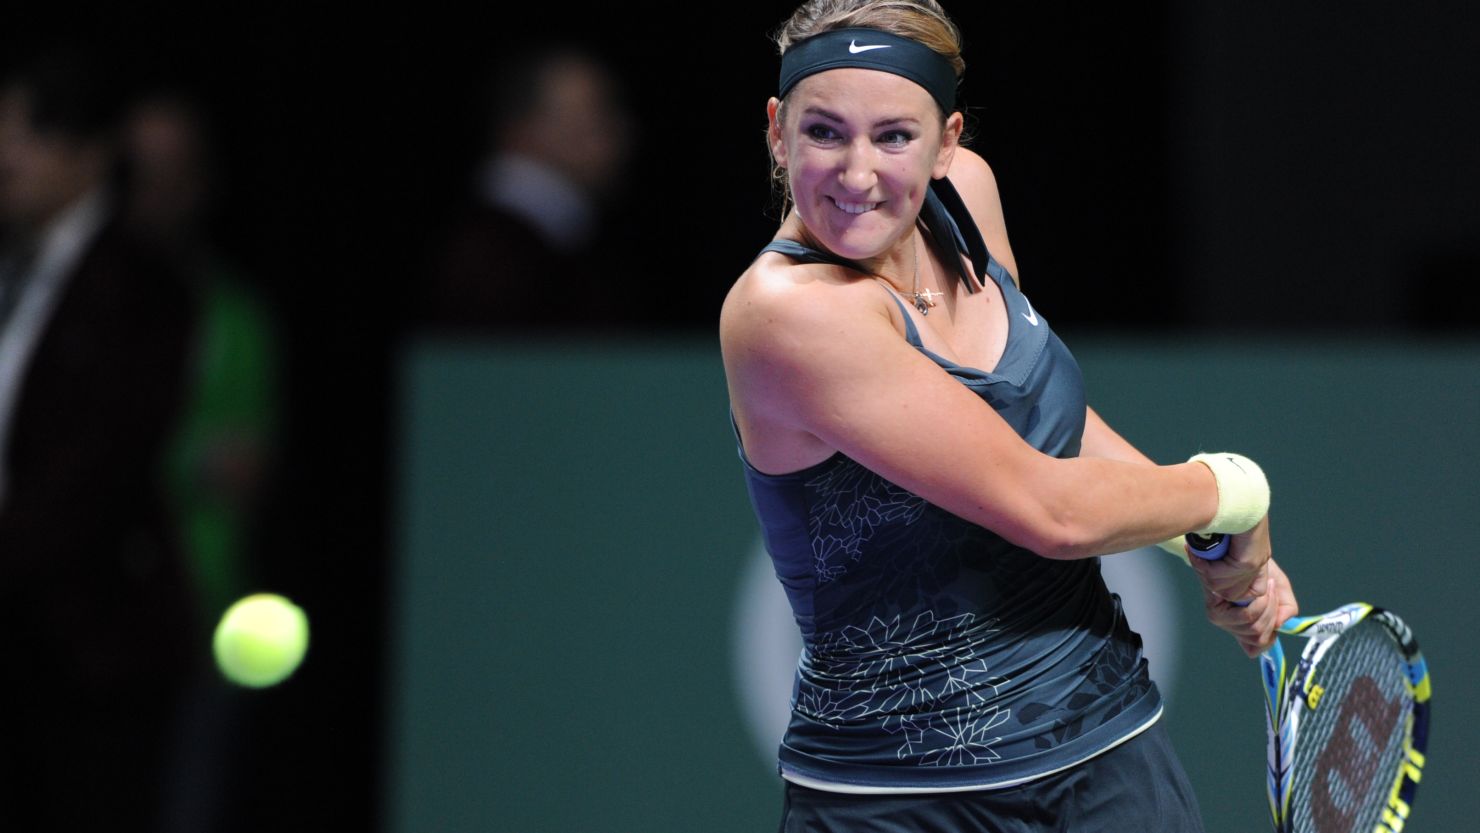 Victoria Azarenka will finish 2012 as the world's top ranked female tennis player